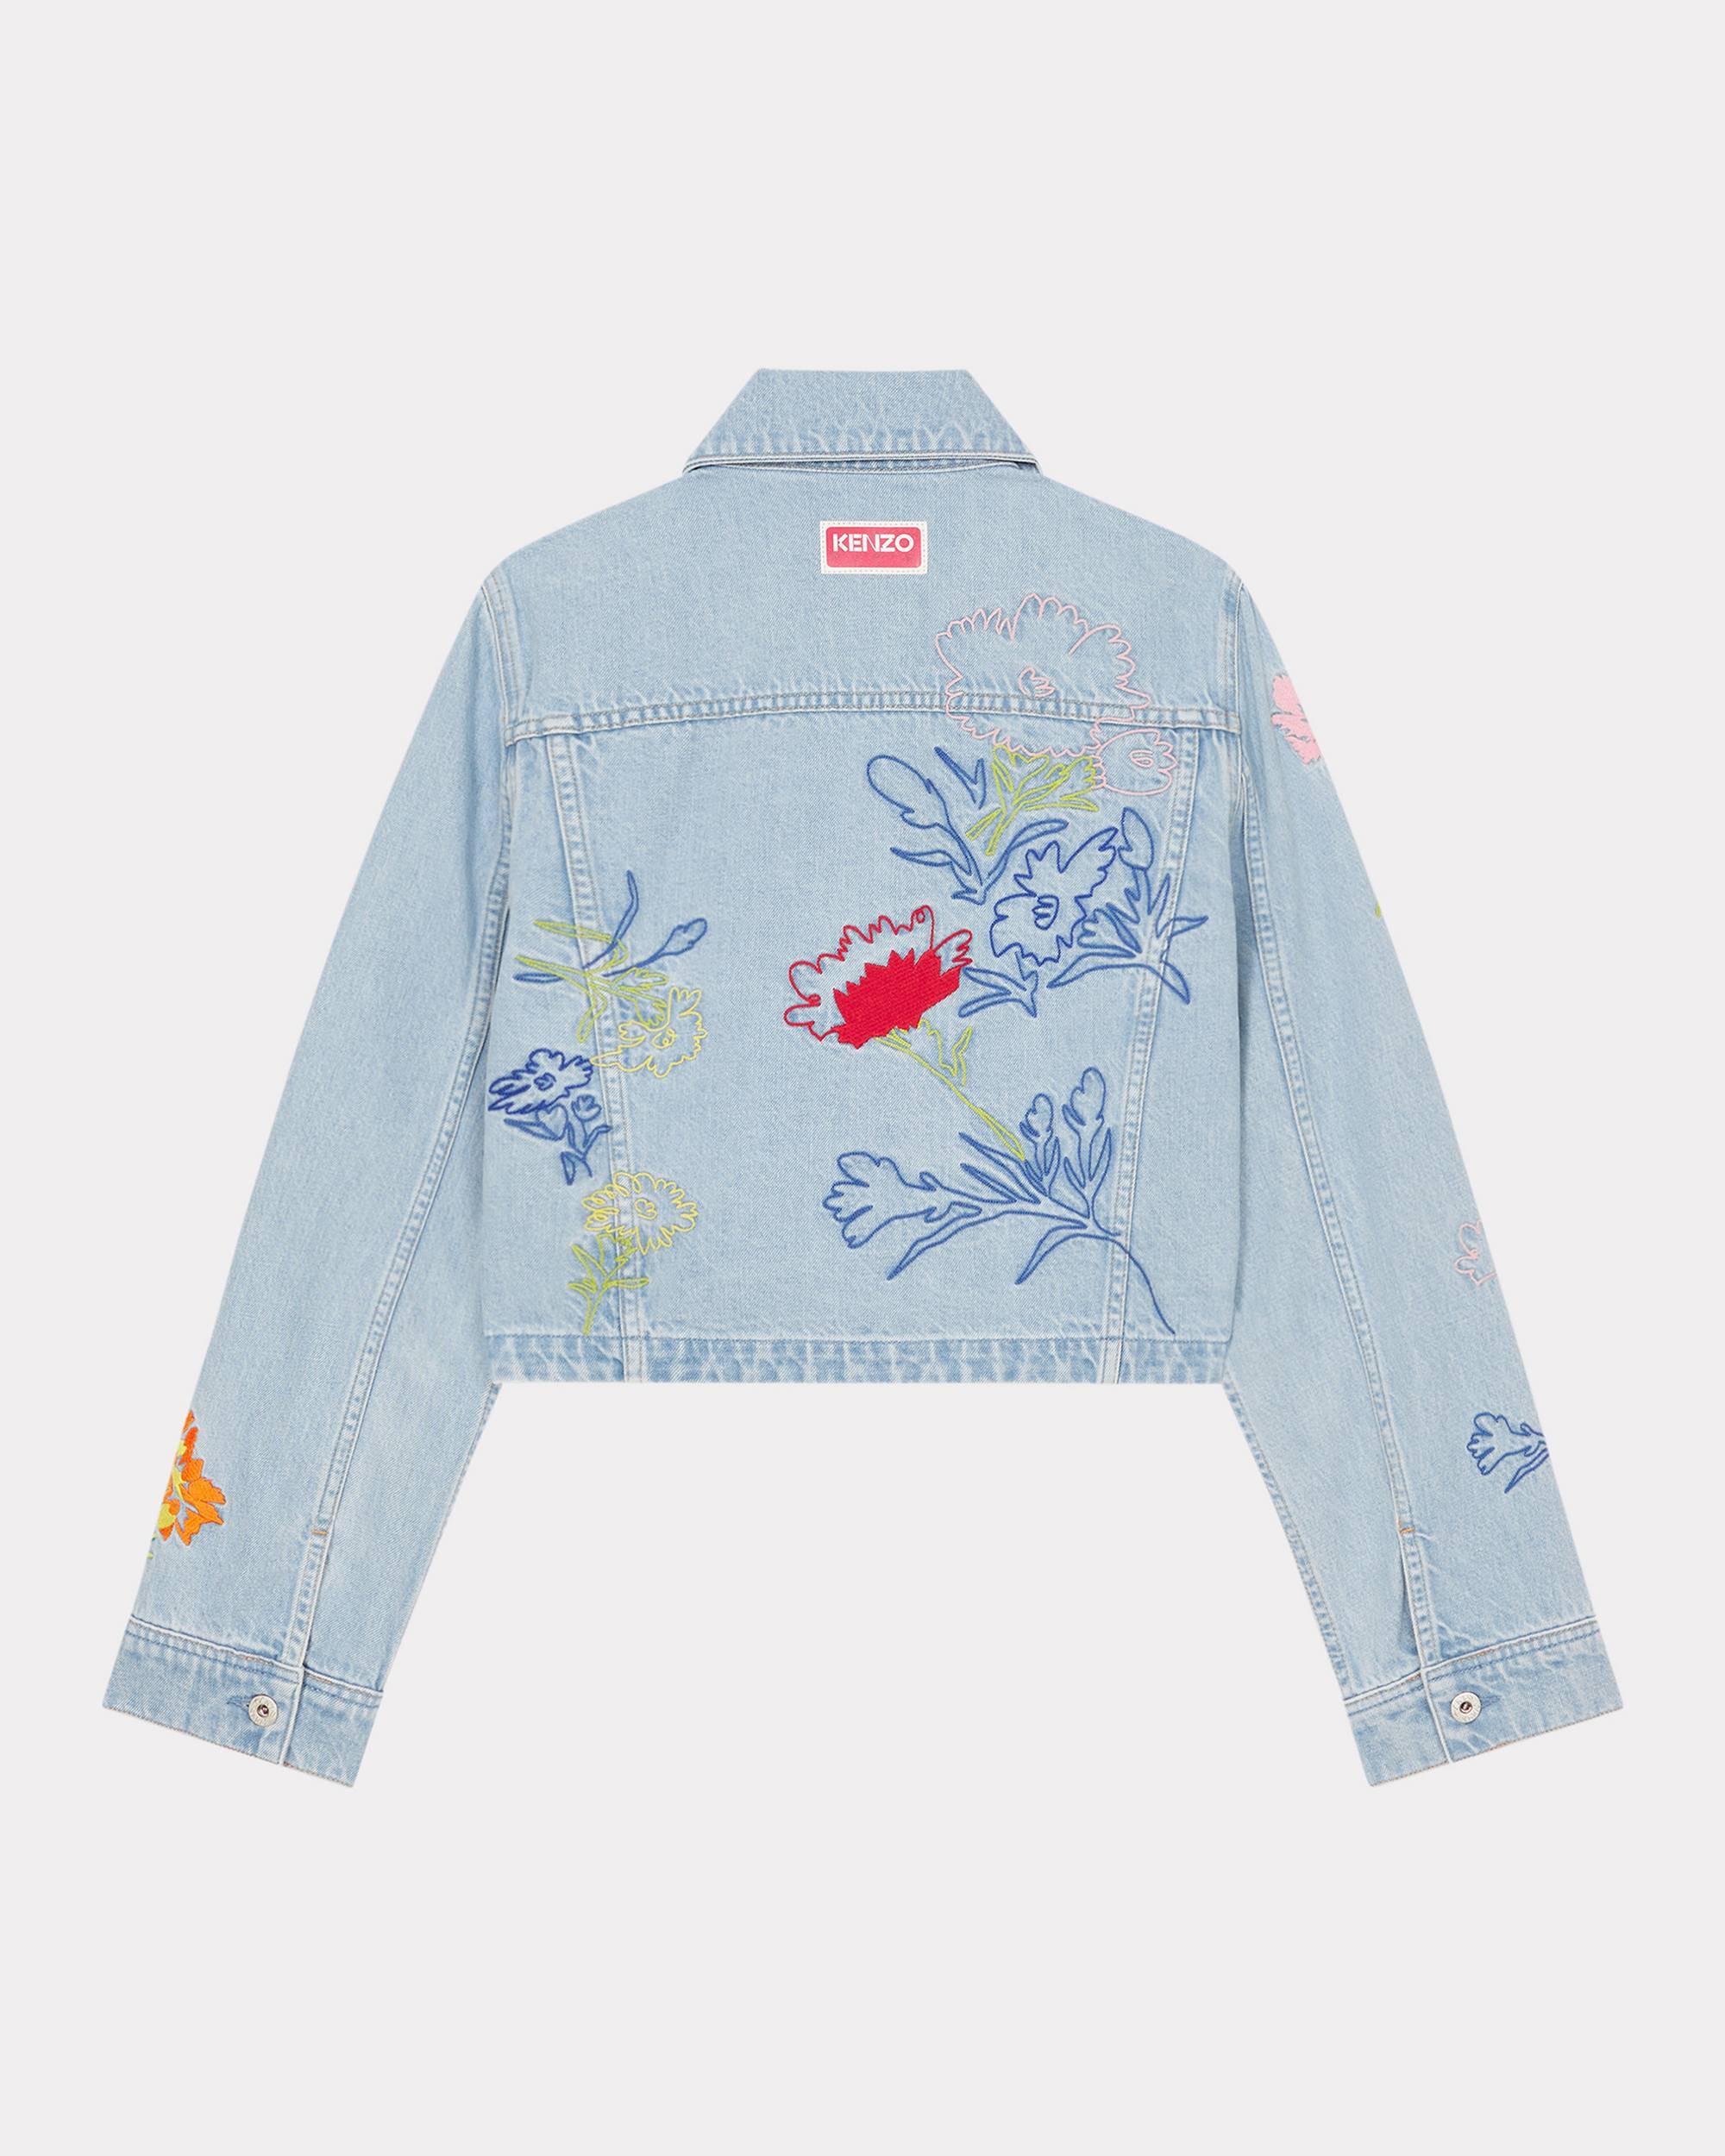 'KENZO Drawn Flowers' embroidered trucker jacket - 2